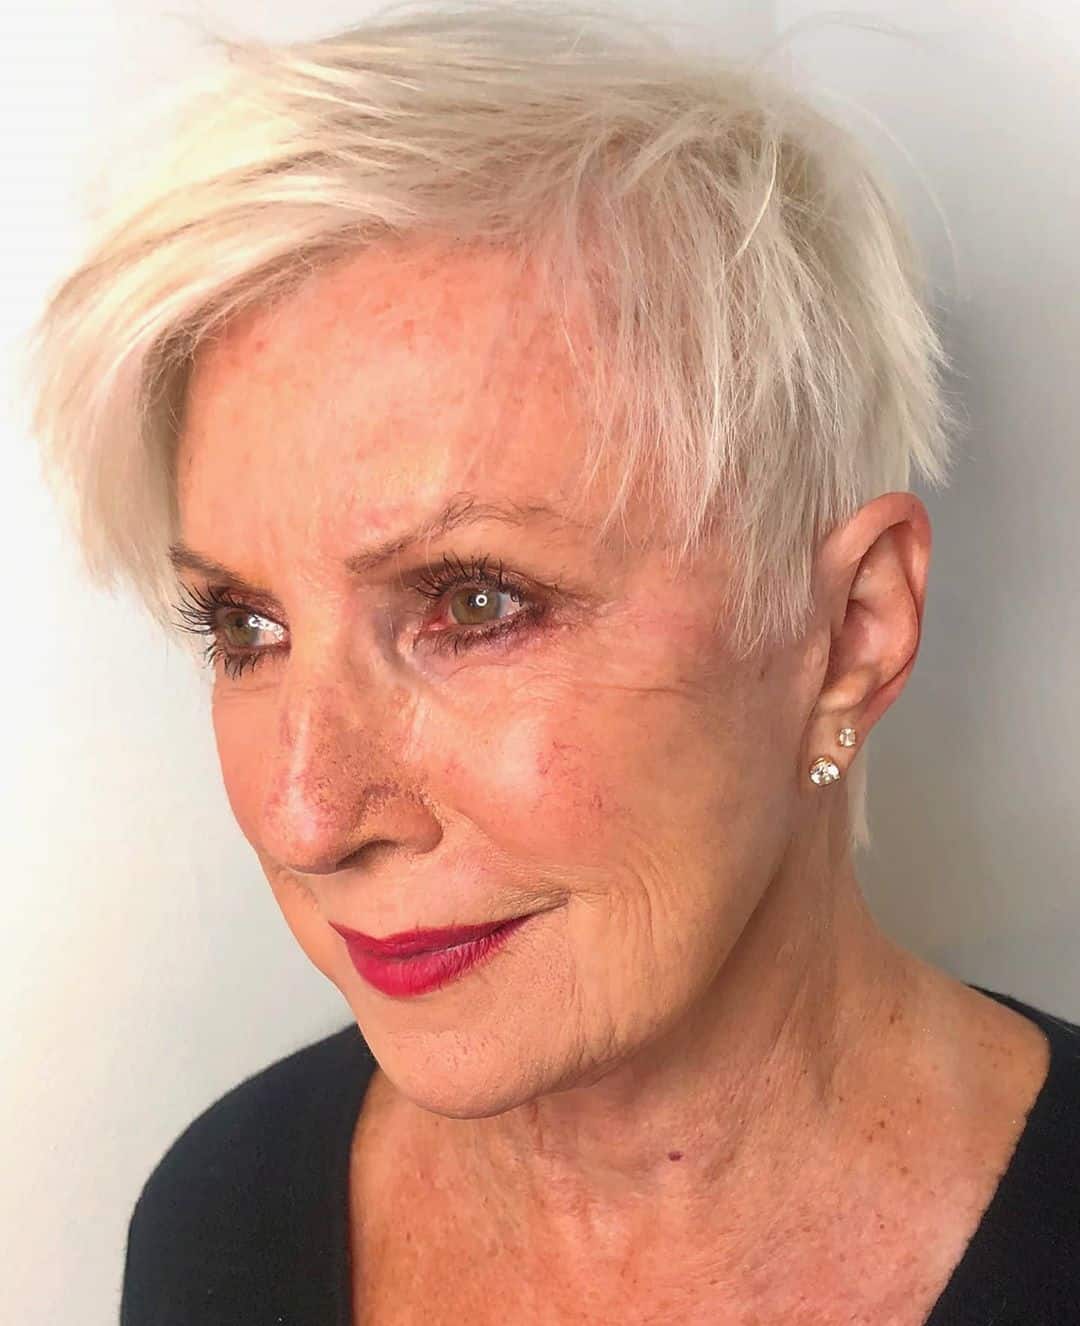 16 Best Pixie Haircuts for Older Women